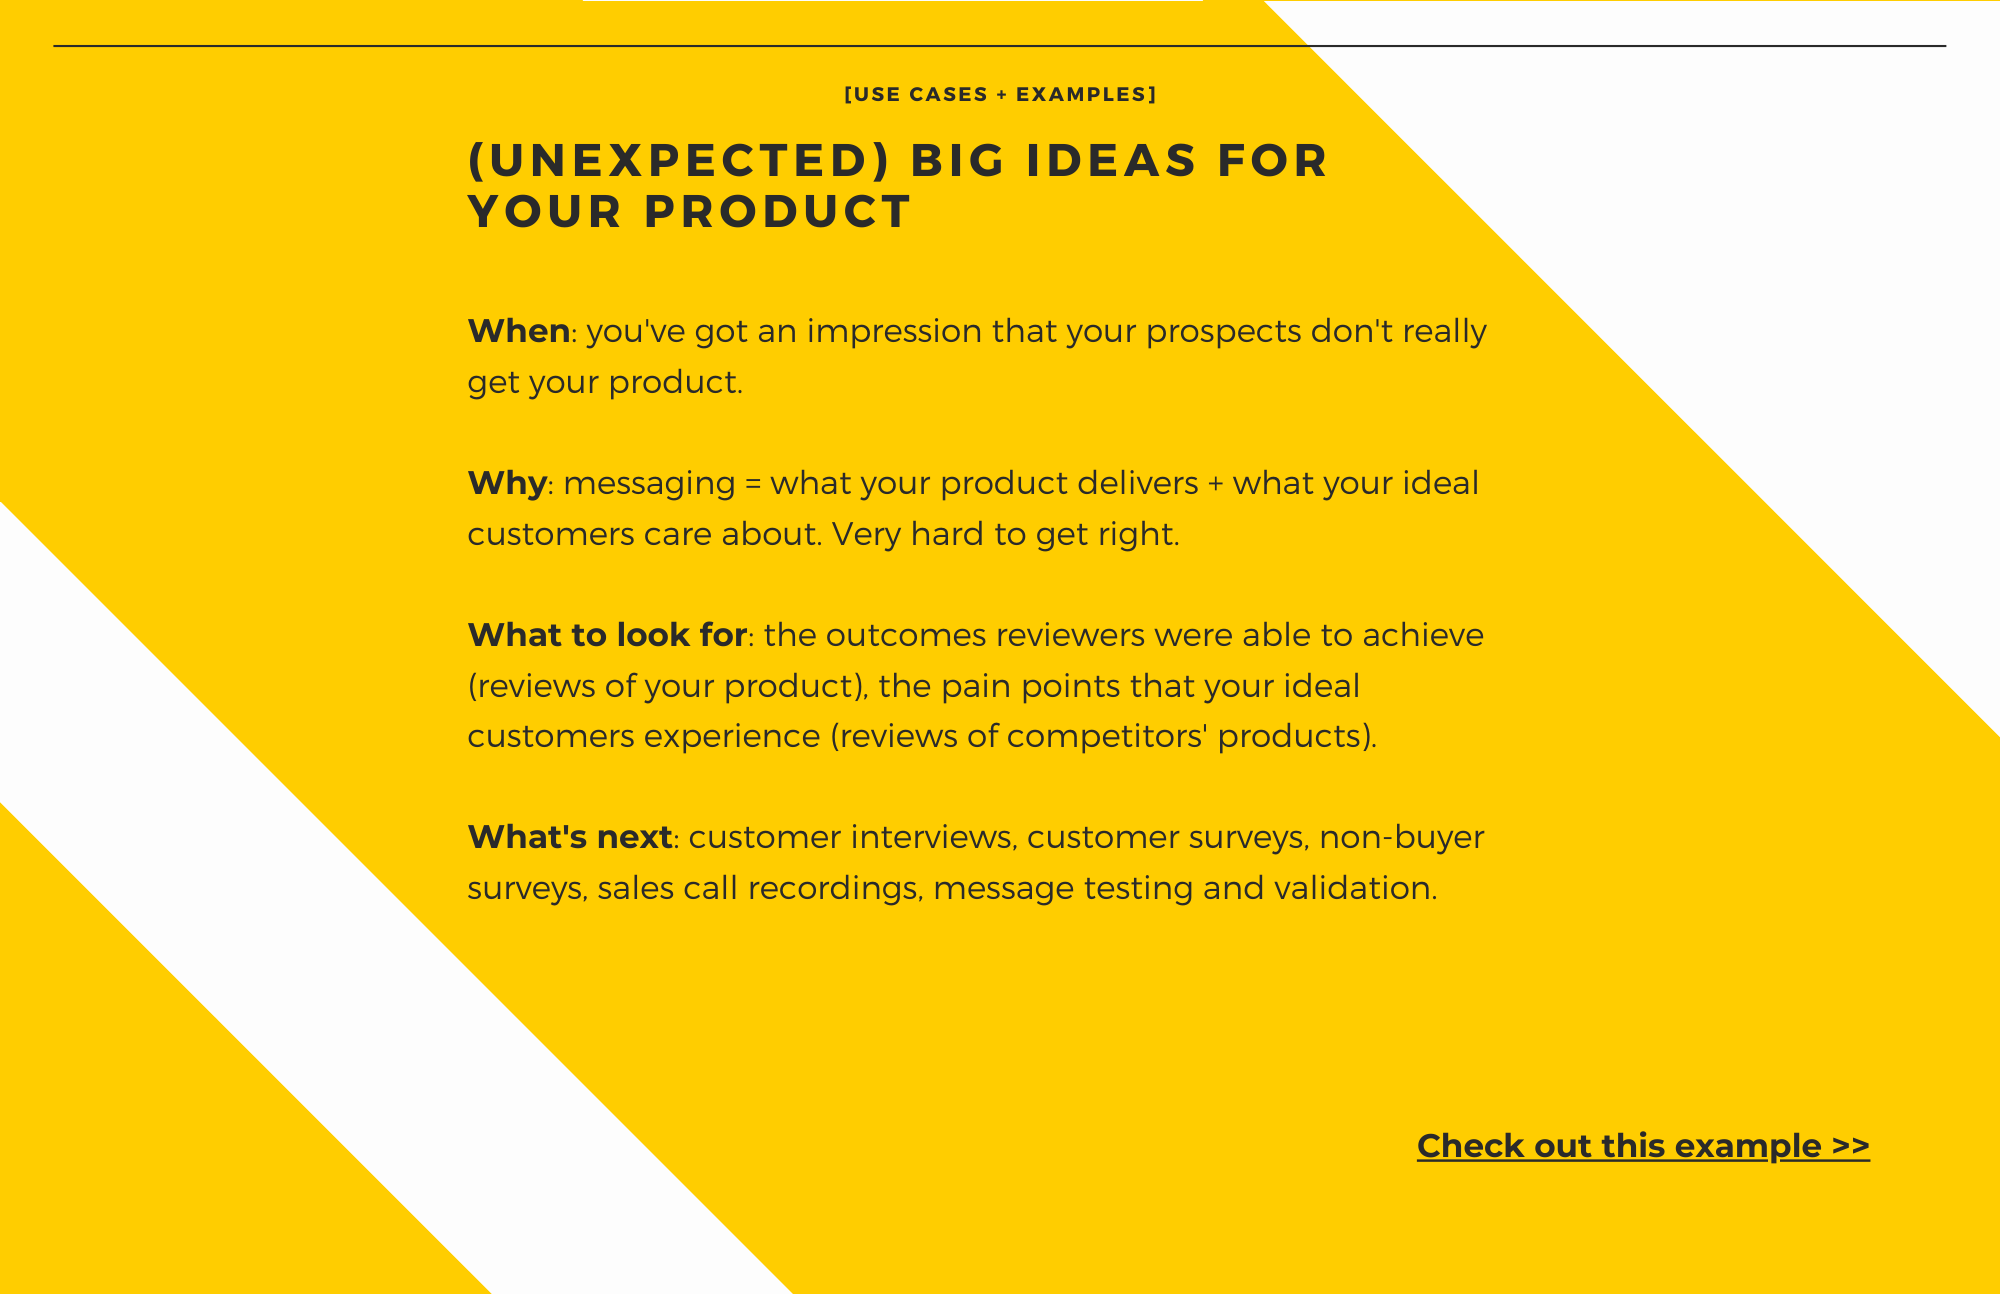 (Unexpected) big ideas for your product